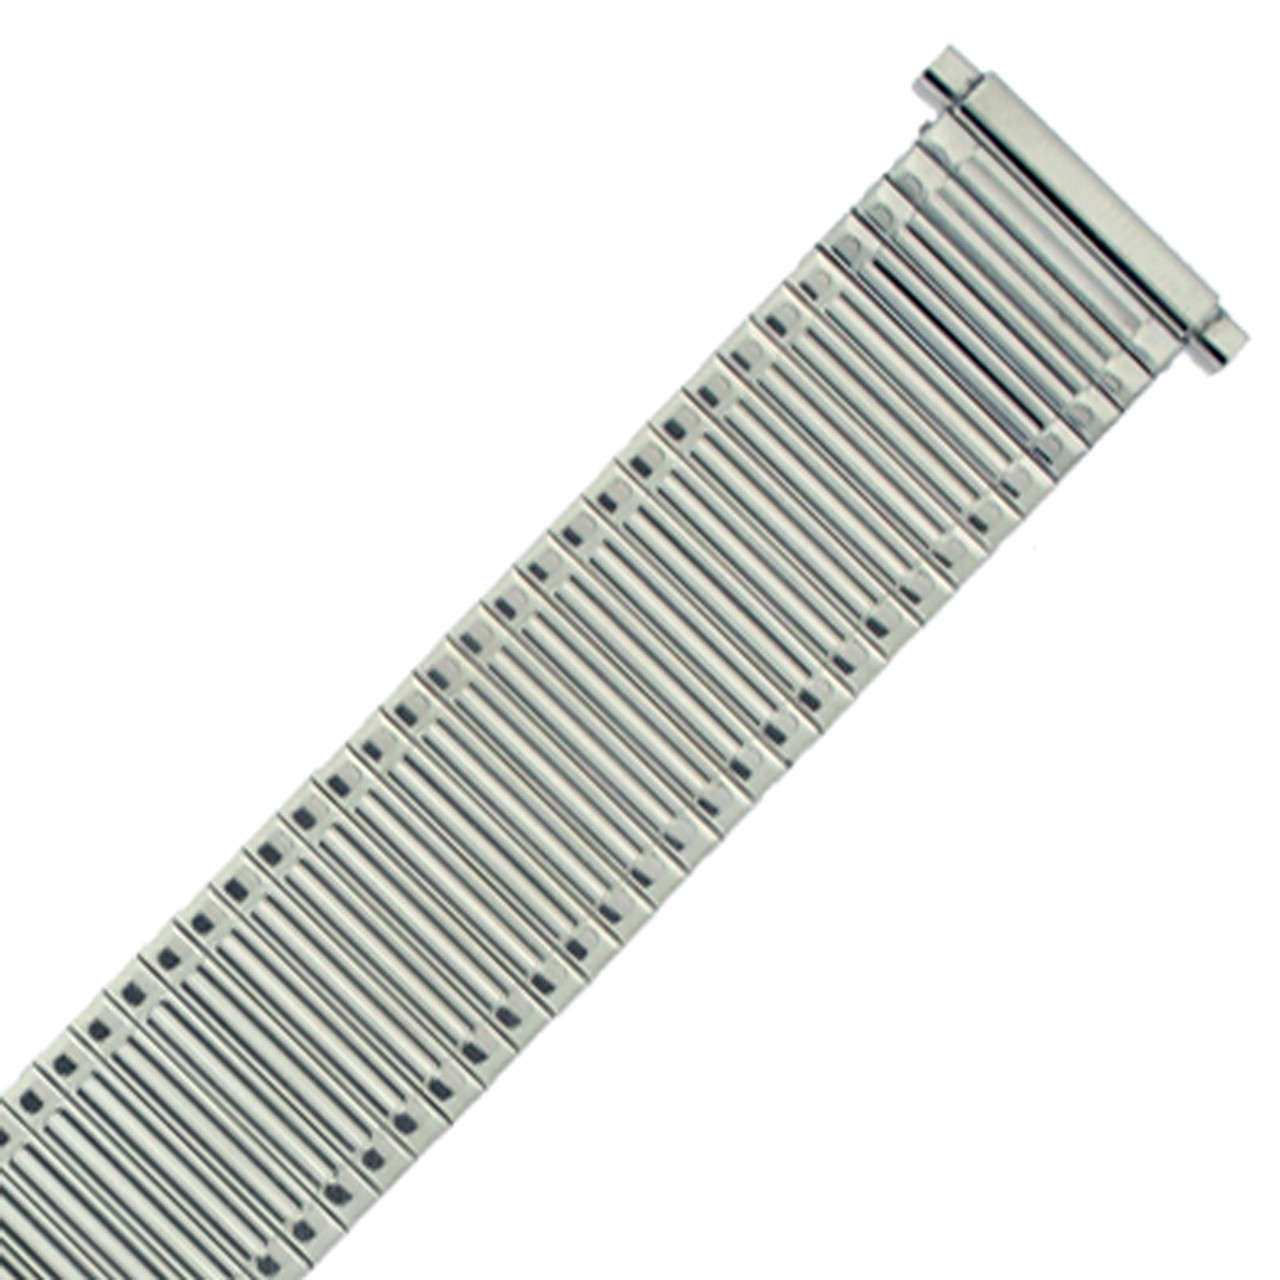 Watch Band Expansion Thin Line fits 17mm to 21mm